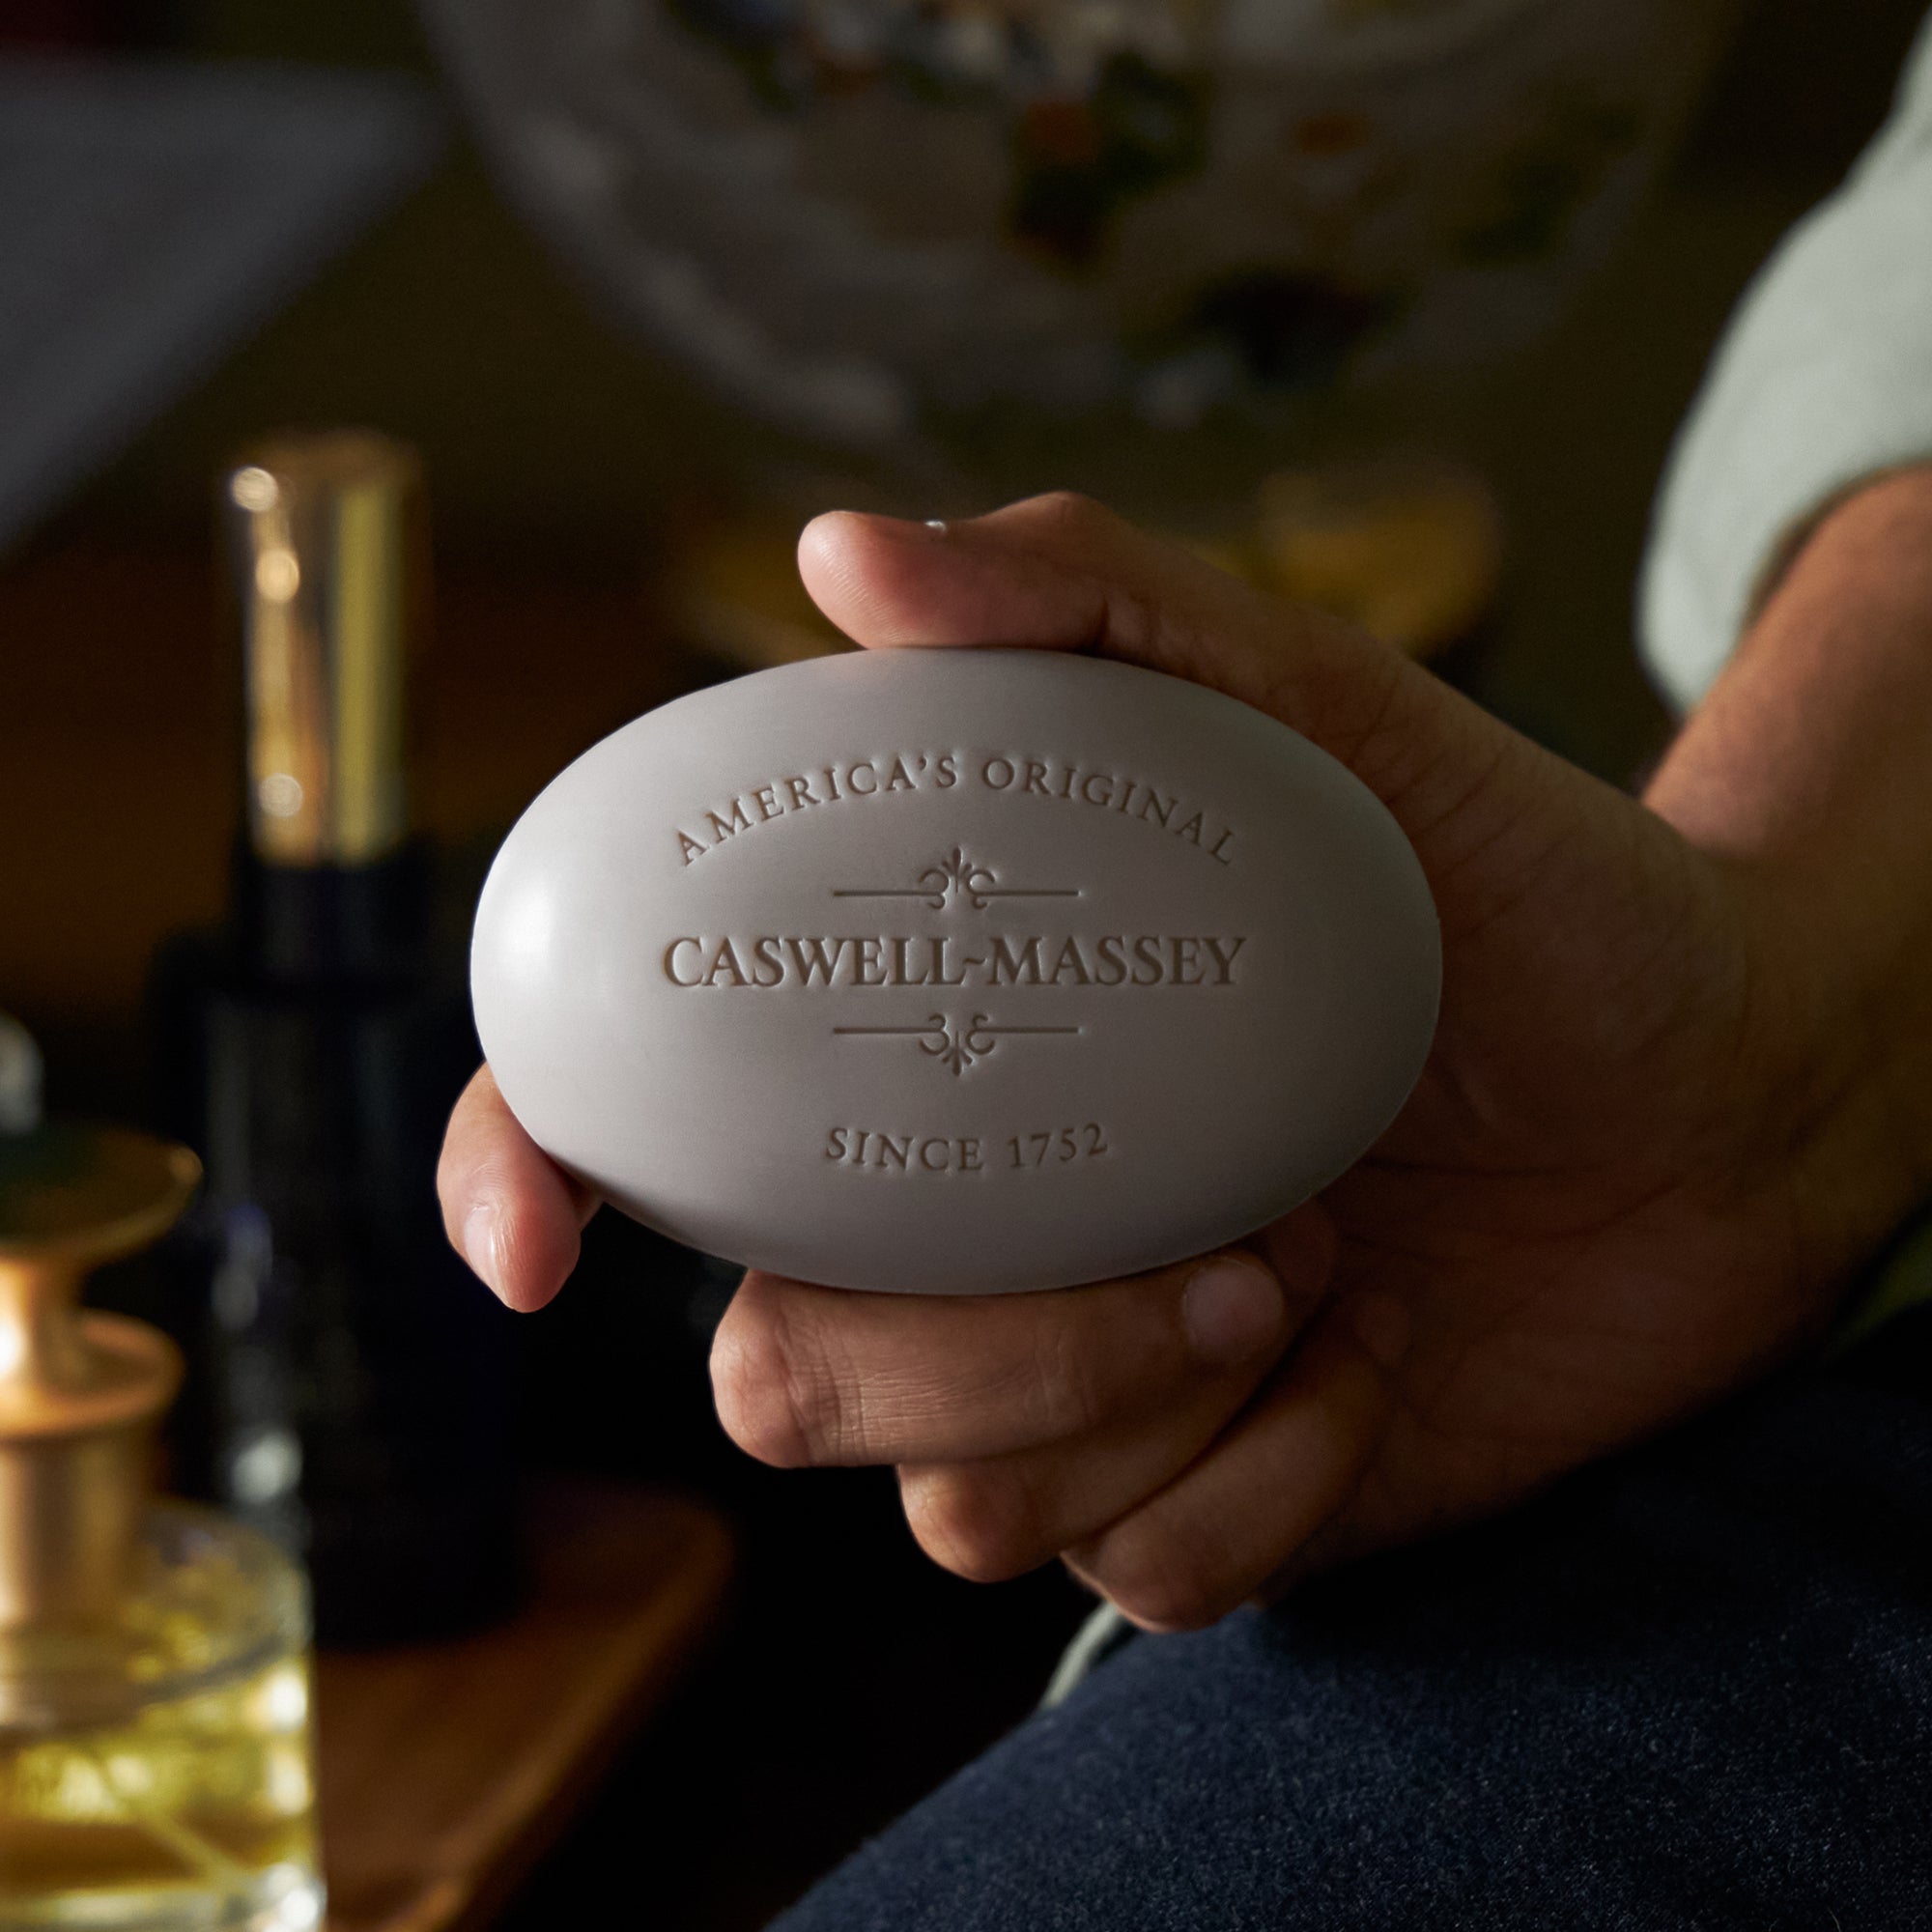 Caswell-Massey LX48 Bar Soap: Man holding the oval bar soap next to fragrance bottles